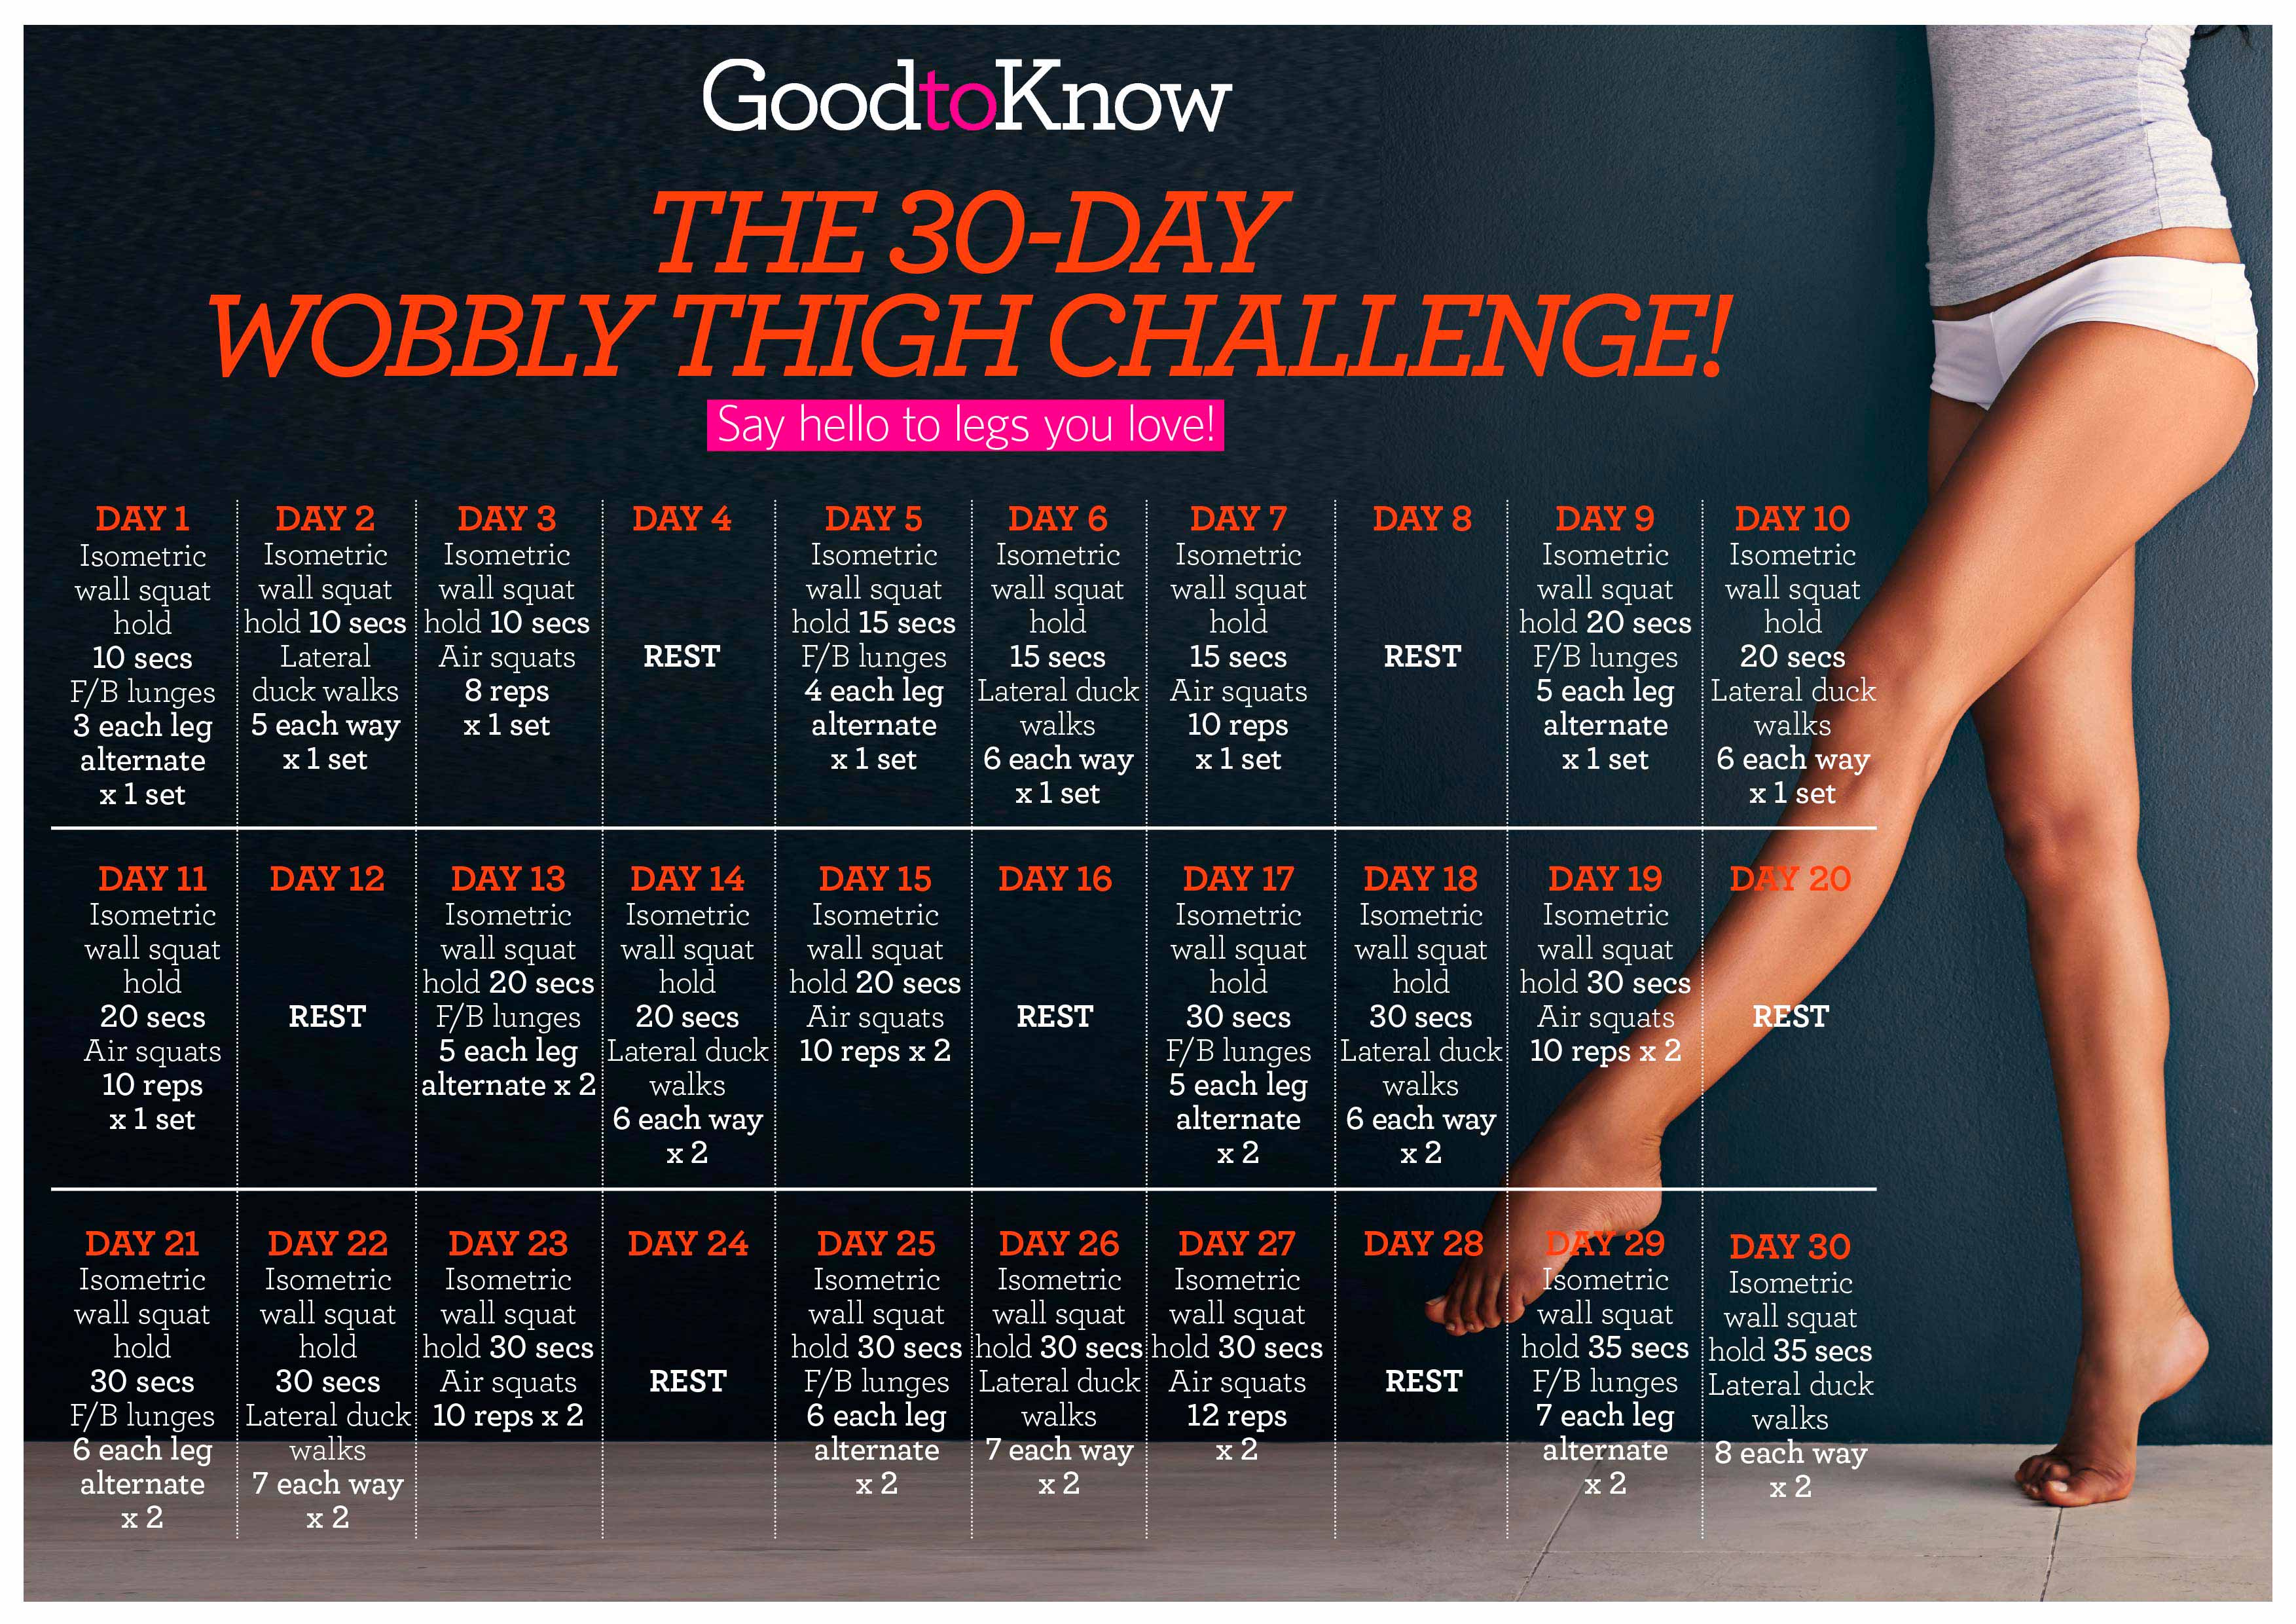 ... wobbly thigh challenge: Thigh exercises to try at home! - goodtoknow